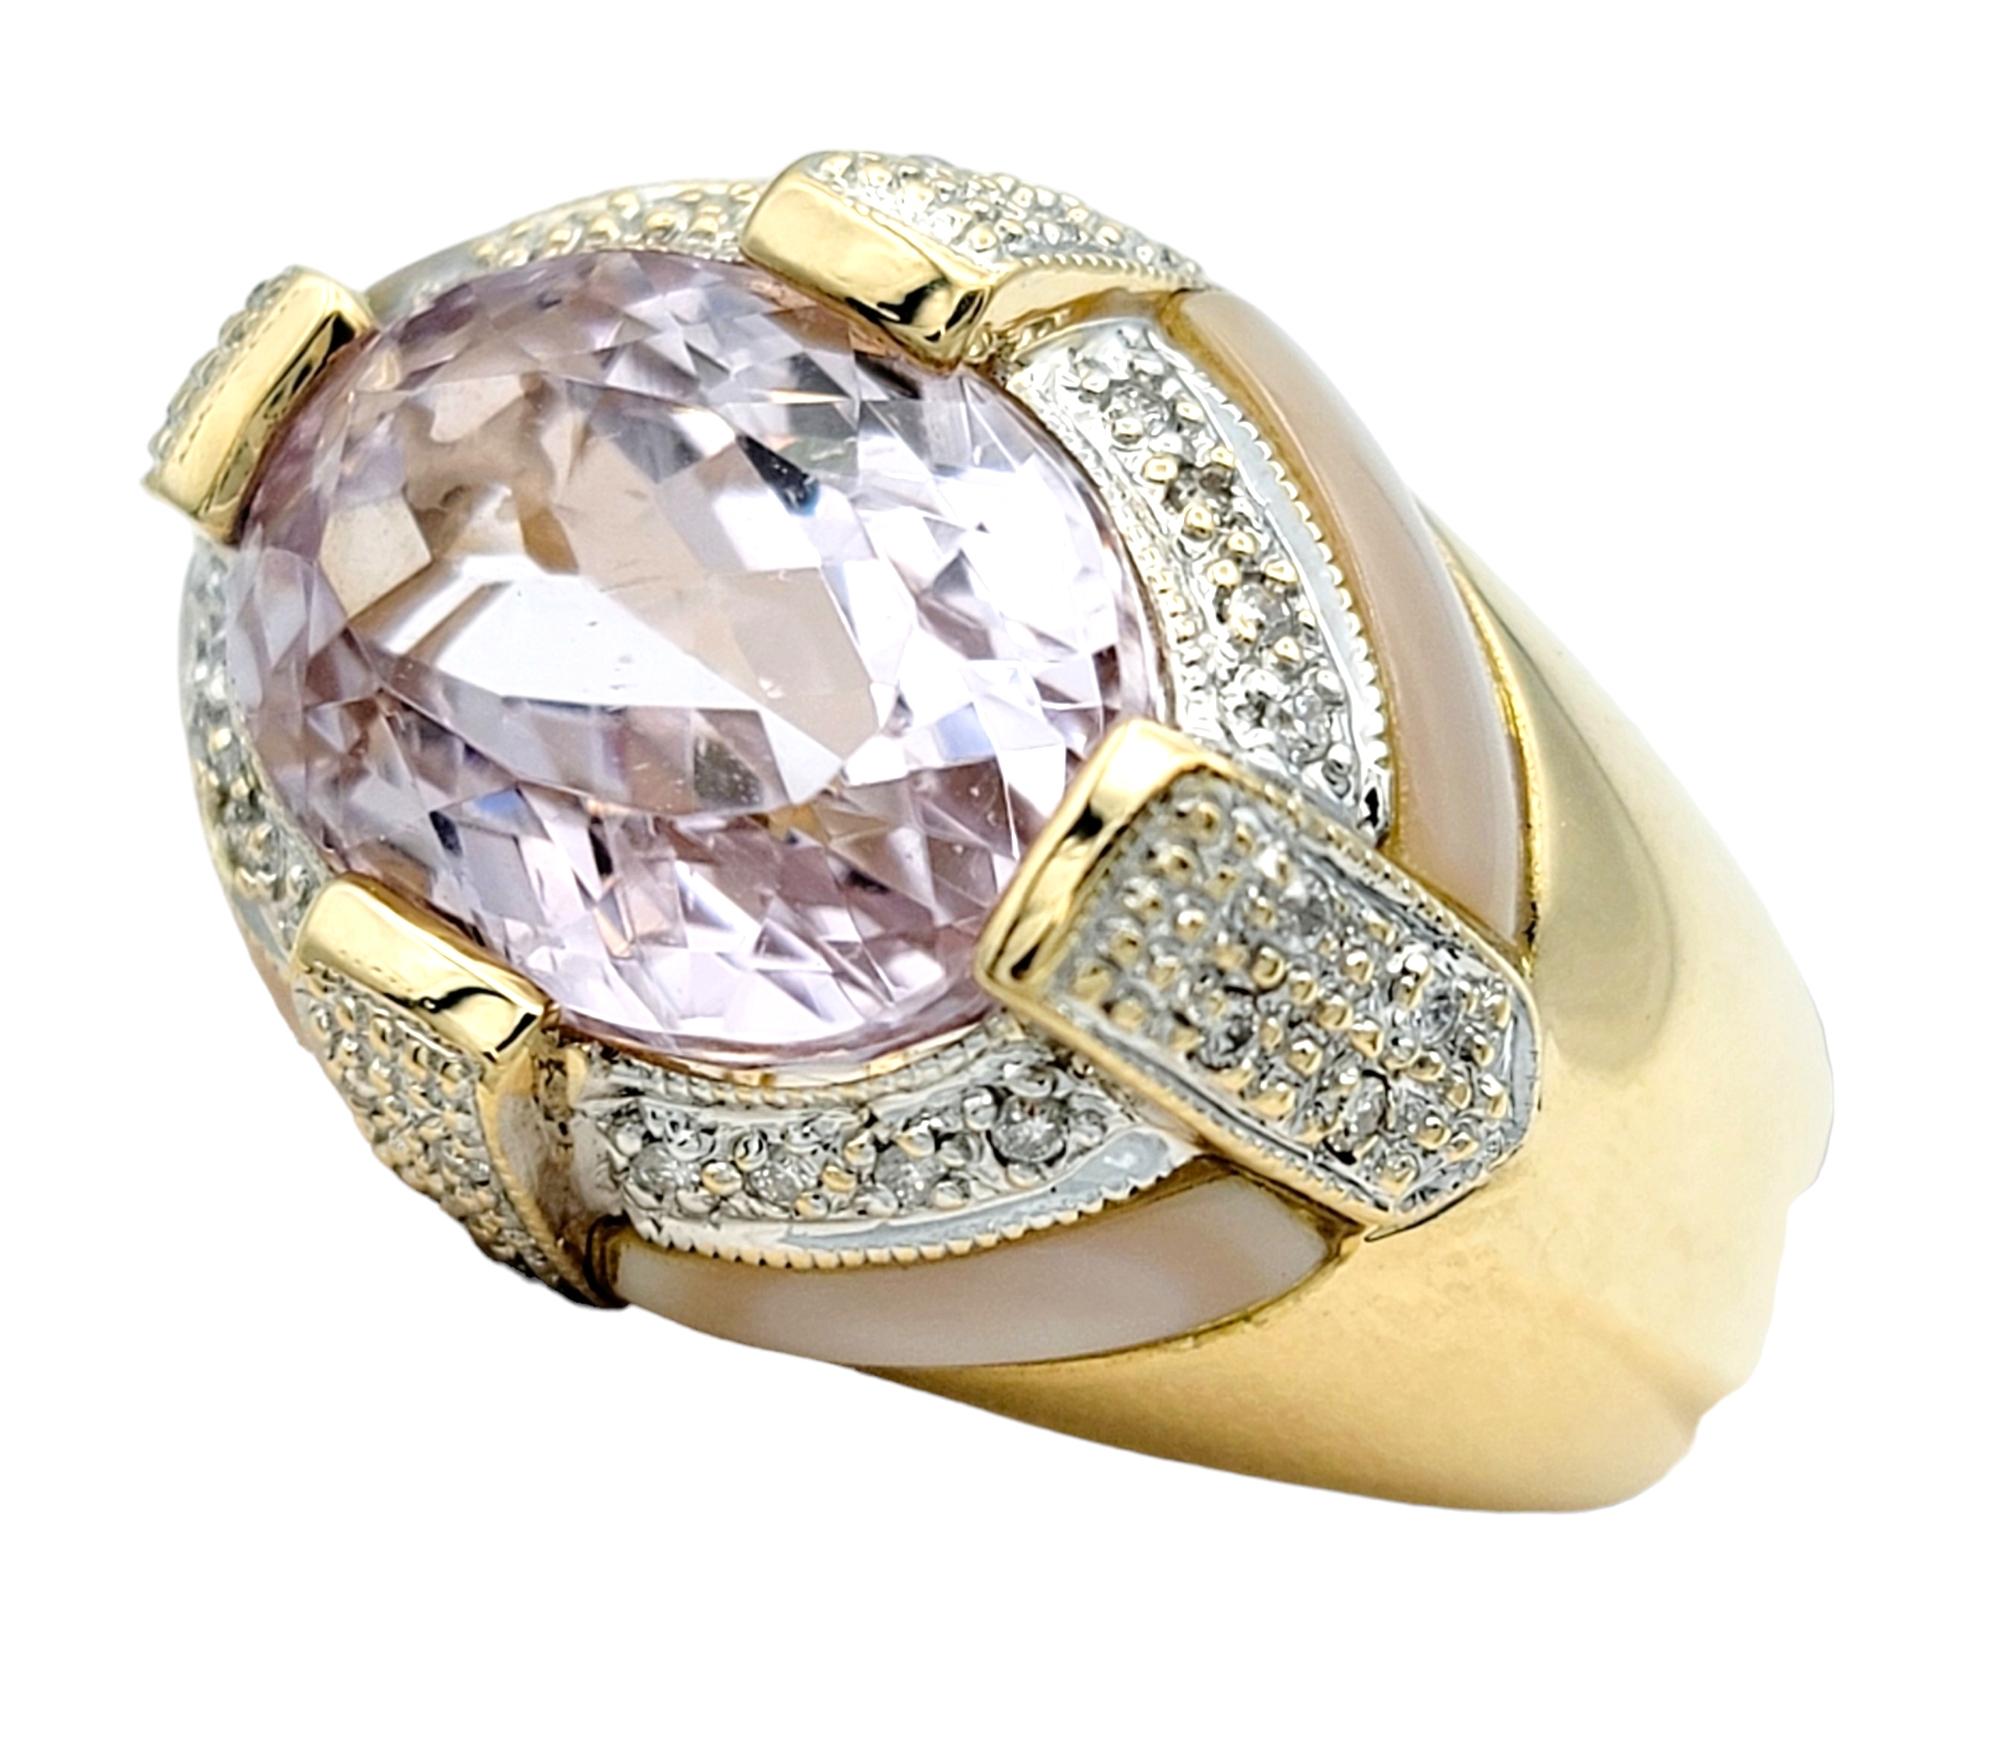 Contemporary Oval Cut Kunzite, Diamond, and Mother of Pearl Cocktail Ring in 14 Karat Gold For Sale